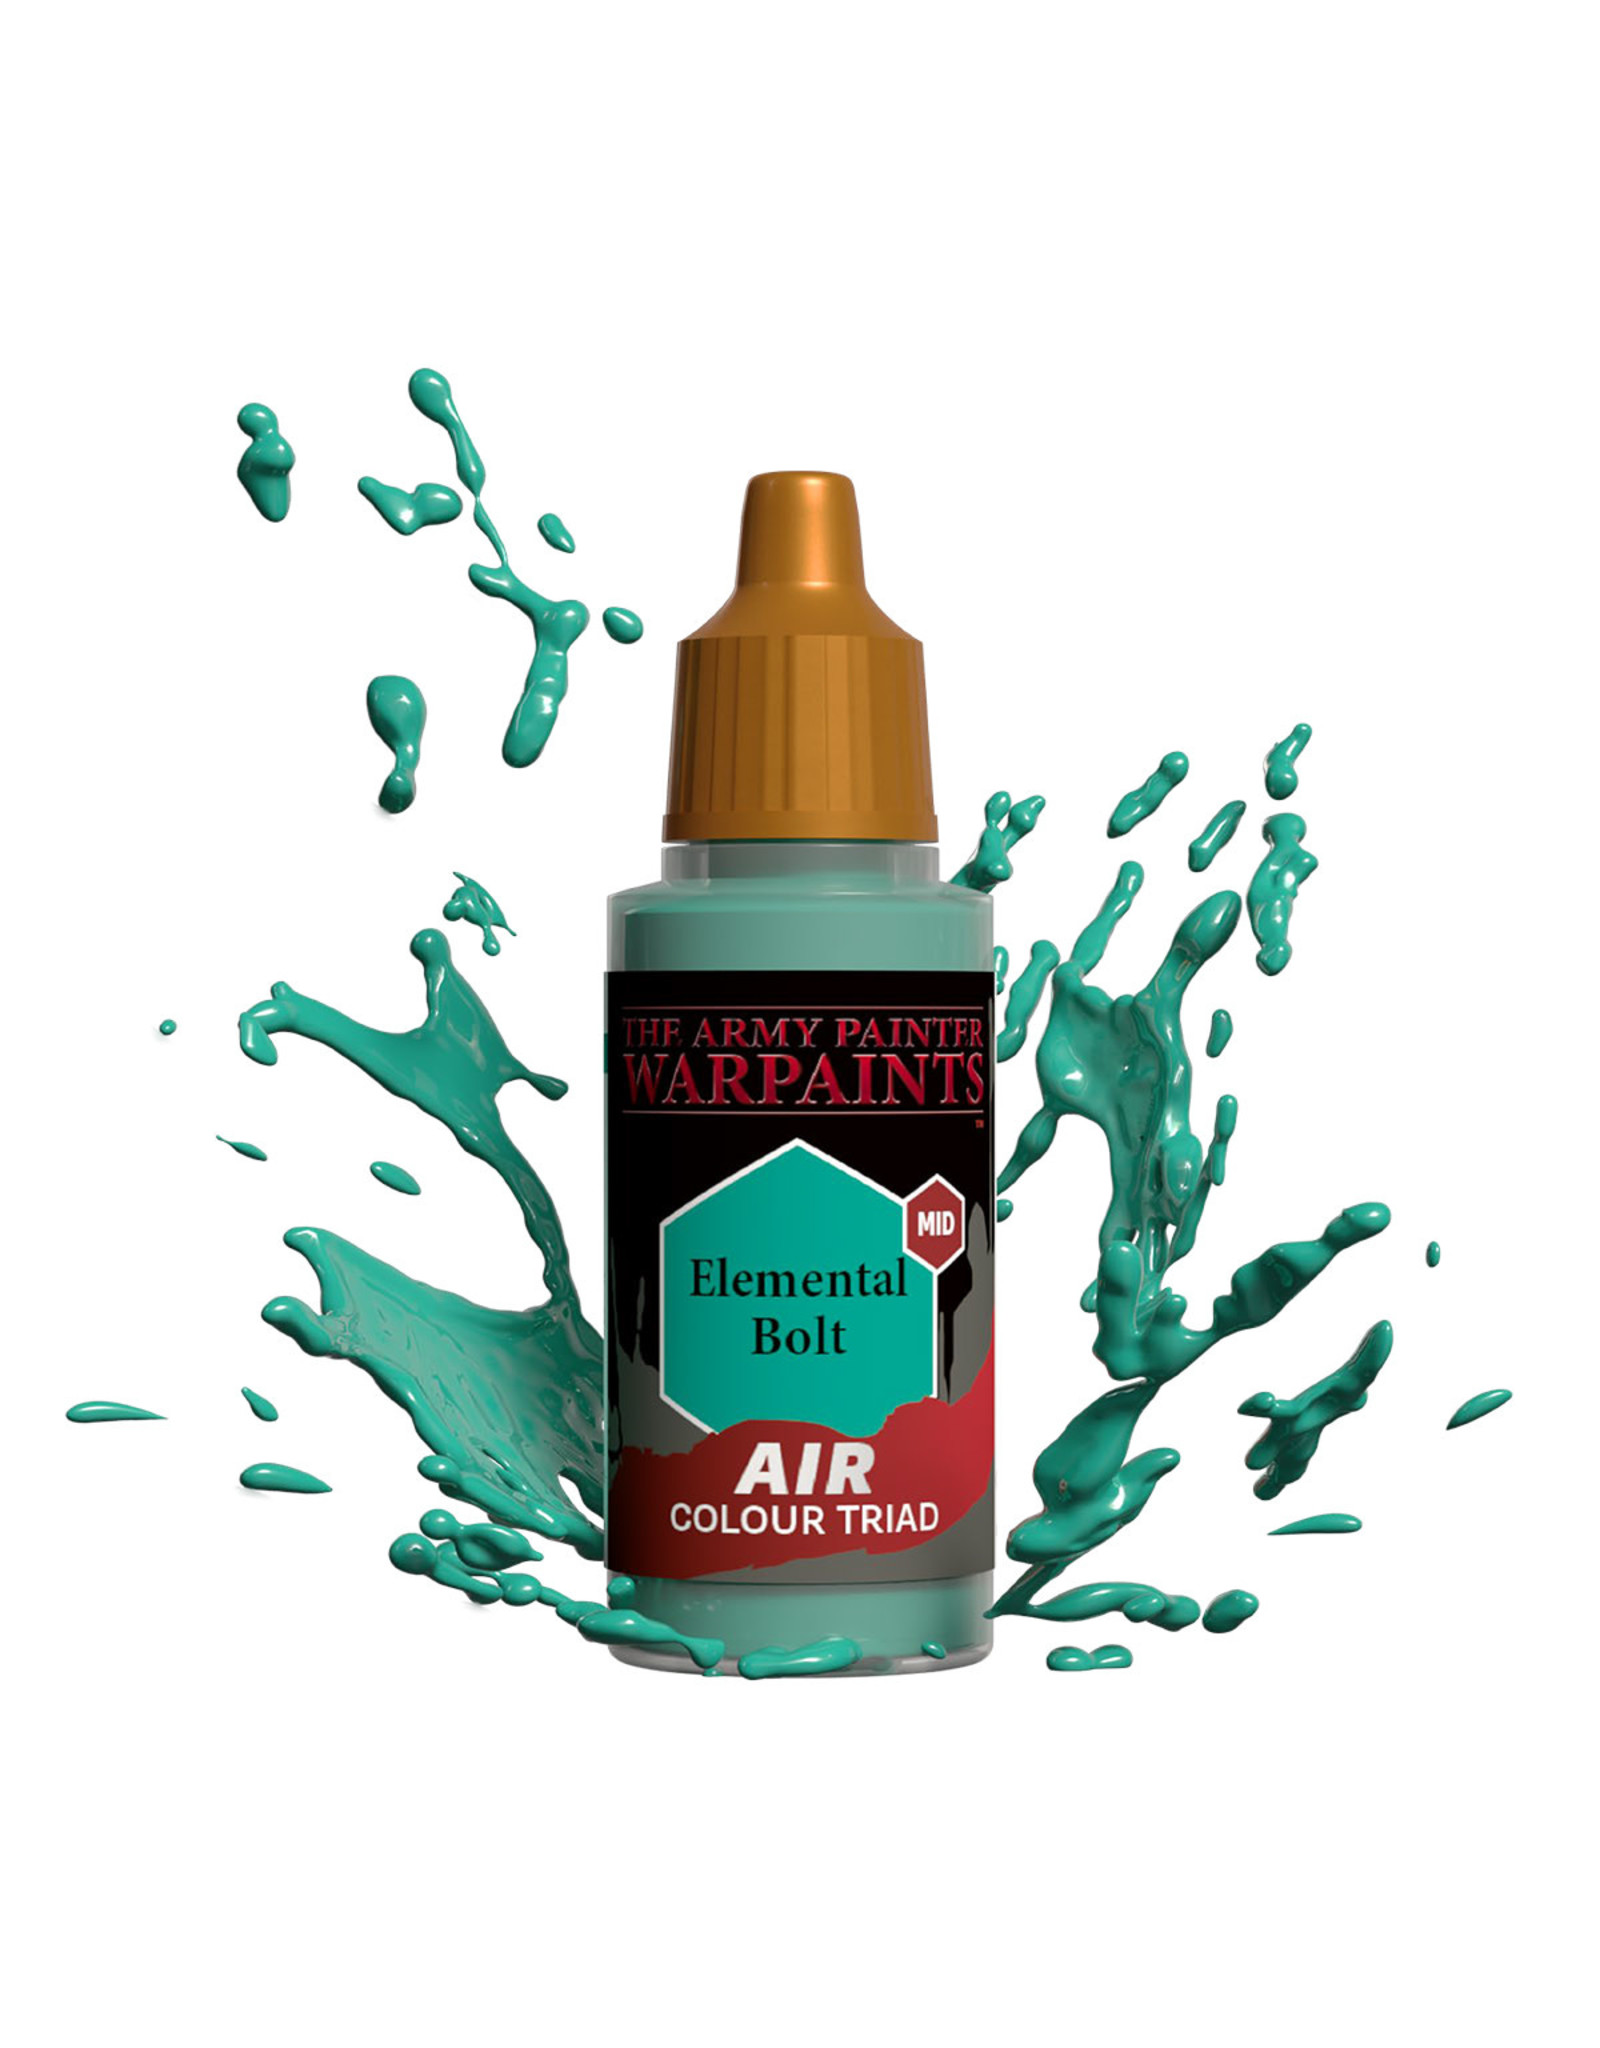 The Army Painter The Army Painter Warpaints Air: Elemental Bolt